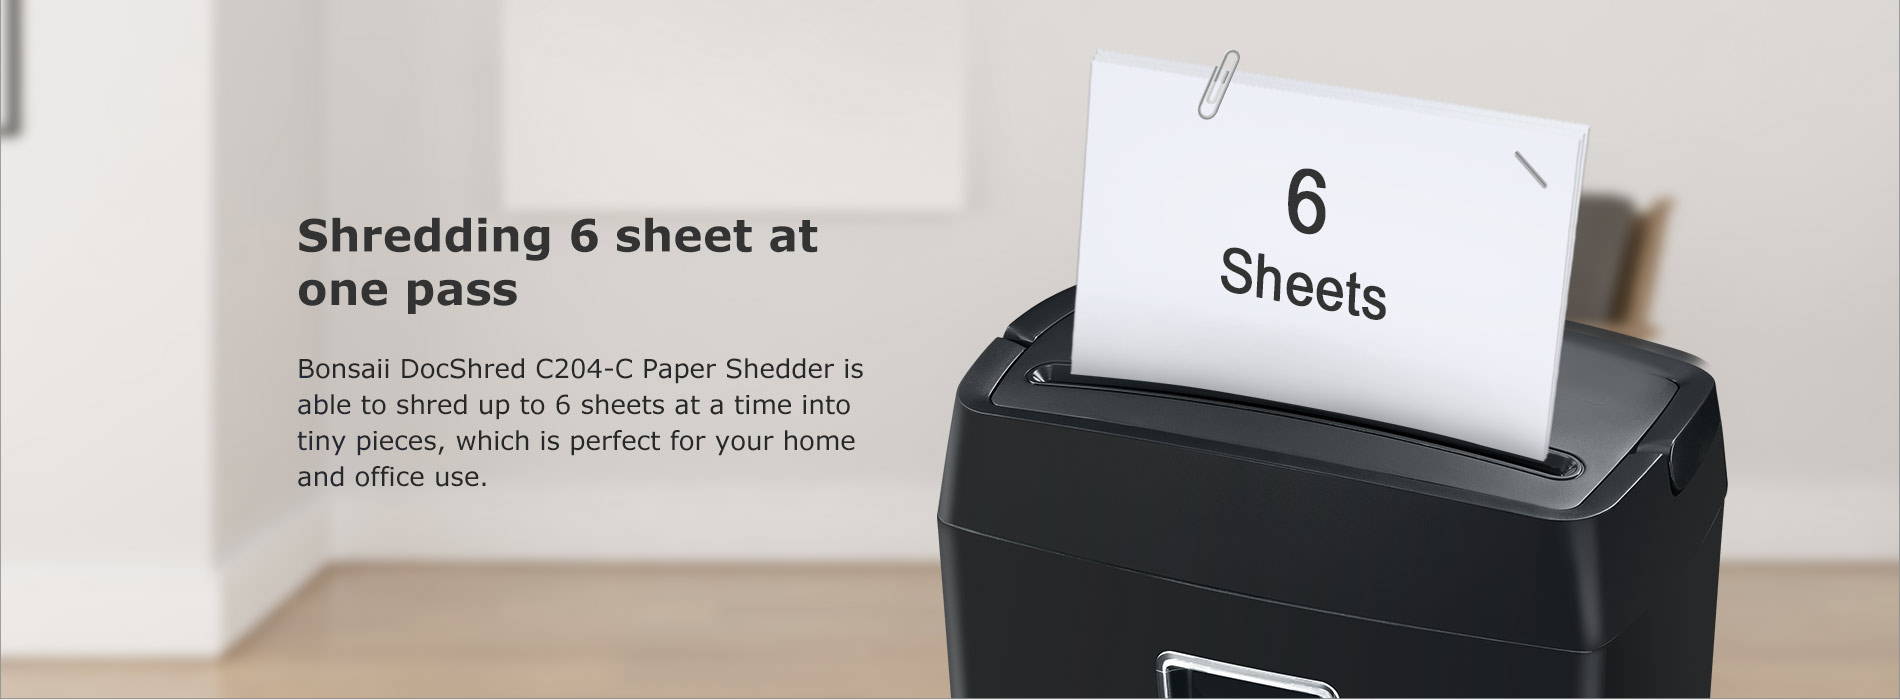 Shredding 6 sheet at one pass Bonsaii DocShred C204-C Paper Shedder is able to shred up to 6 sheets at a time into tiny pieces, which is perfect for your home and office use.